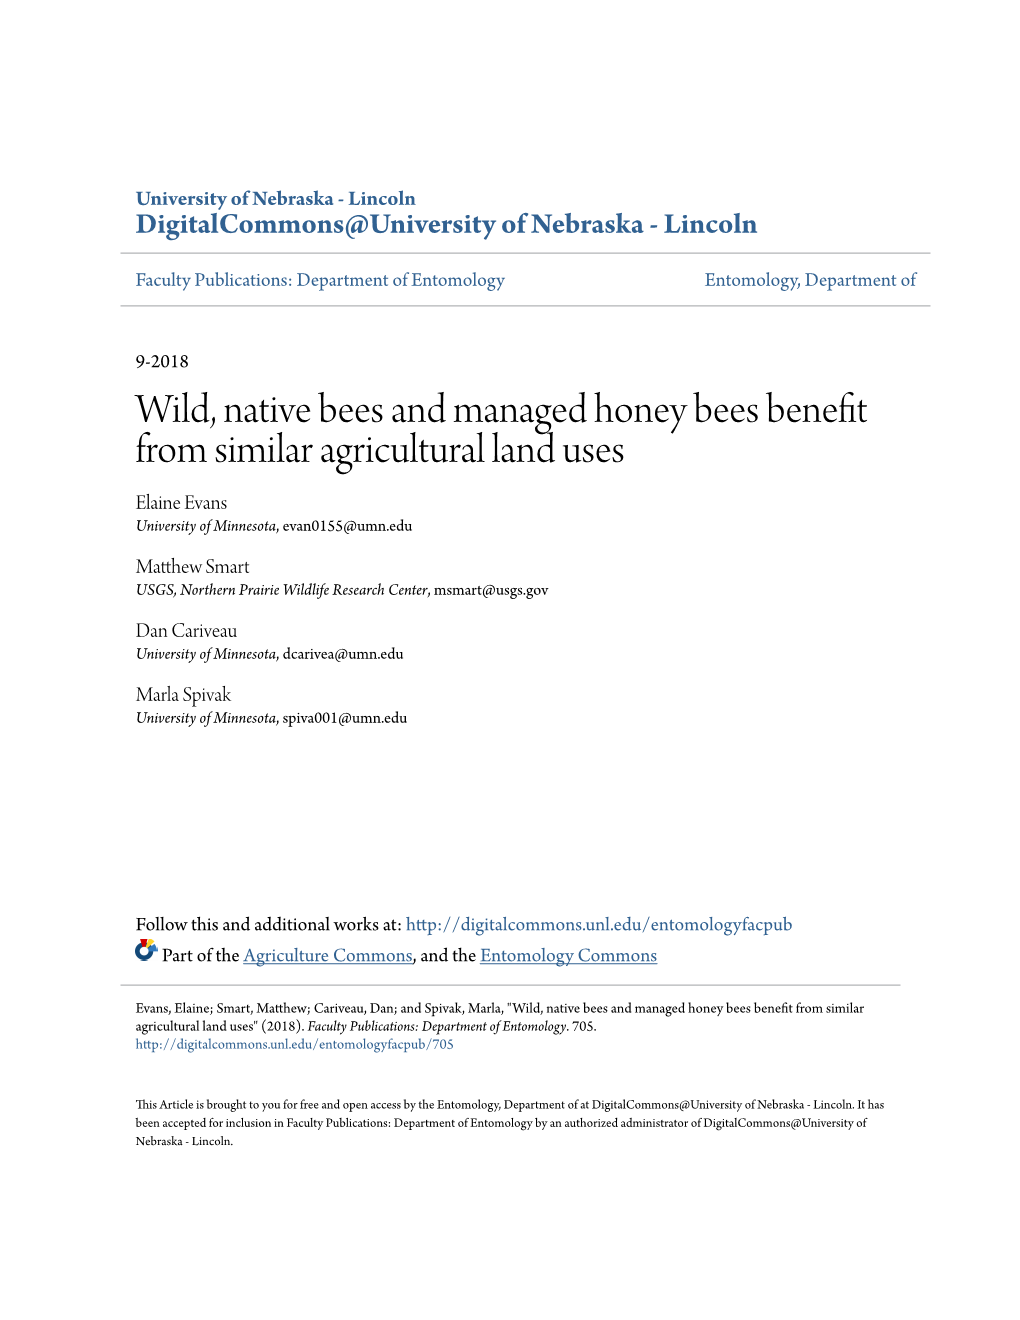 Wild, Native Bees and Managed Honey Bees Benefit from Similar Agricultural Land Uses Elaine Evans University of Minnesota, Evan0155@Umn.Edu